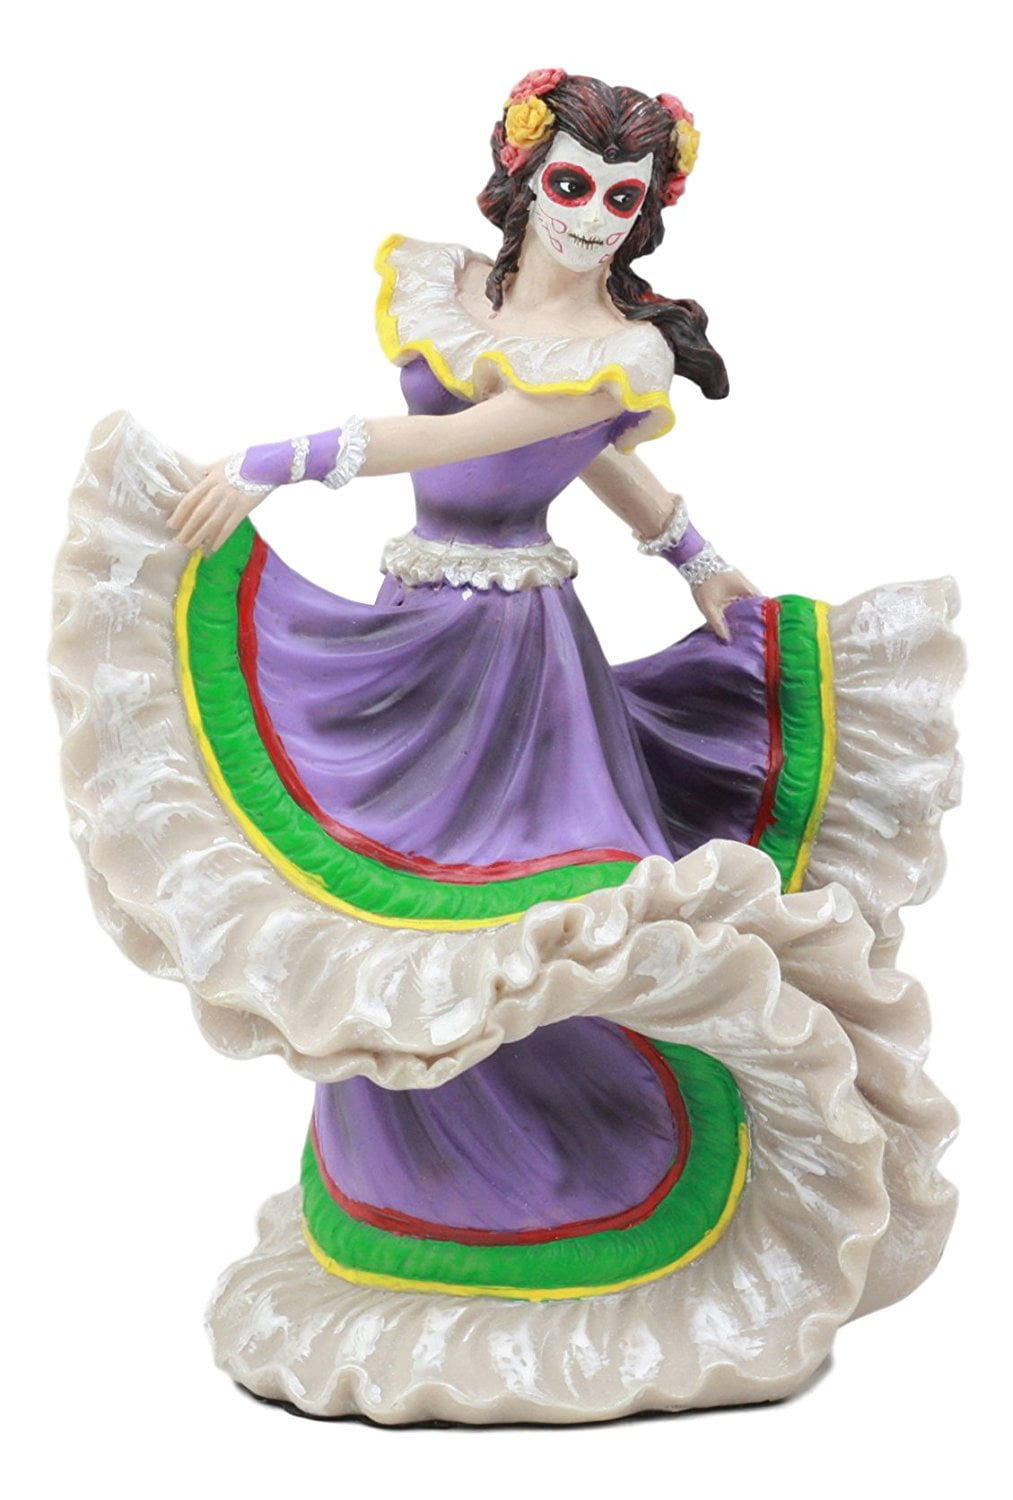 Day Of The Dead Traditional Green Gown Dancer Statue Sugar Skull 7.75"H Figurine 